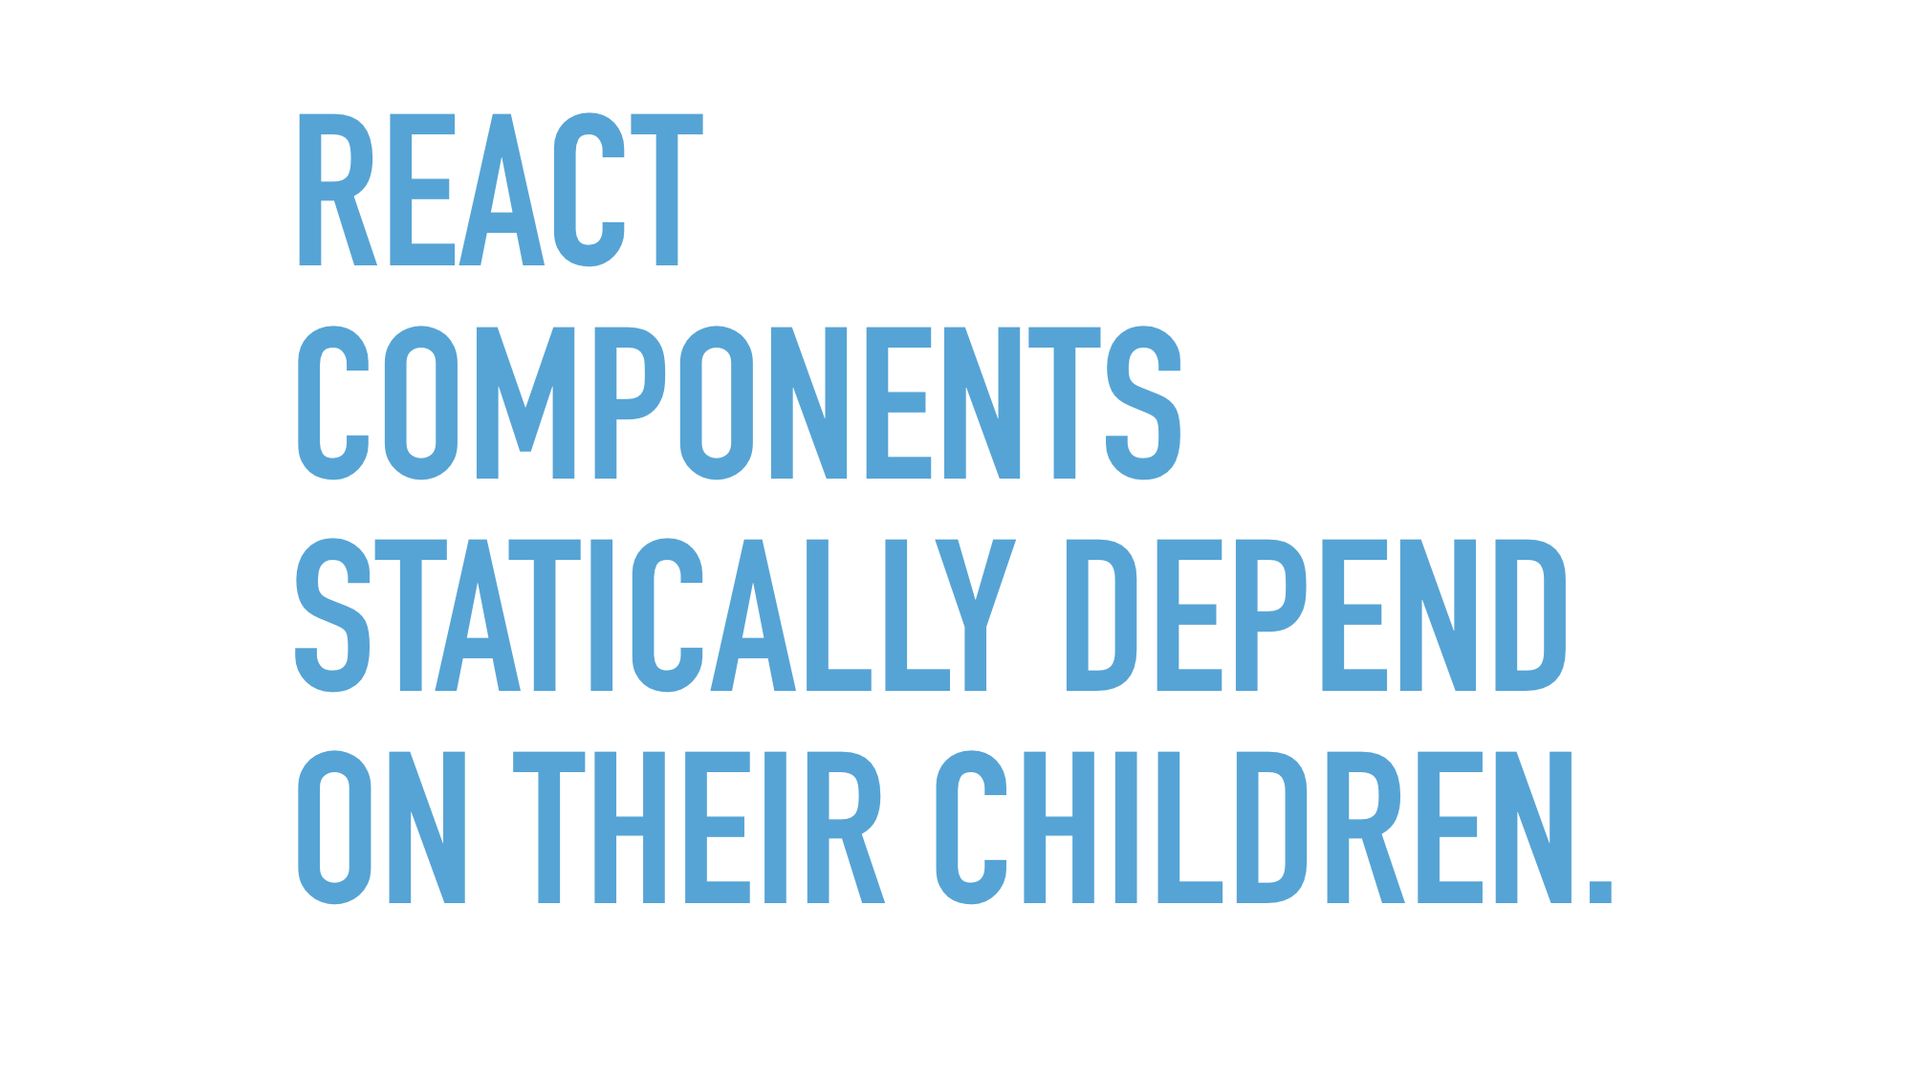 Slide text: React component statically depend on their children.